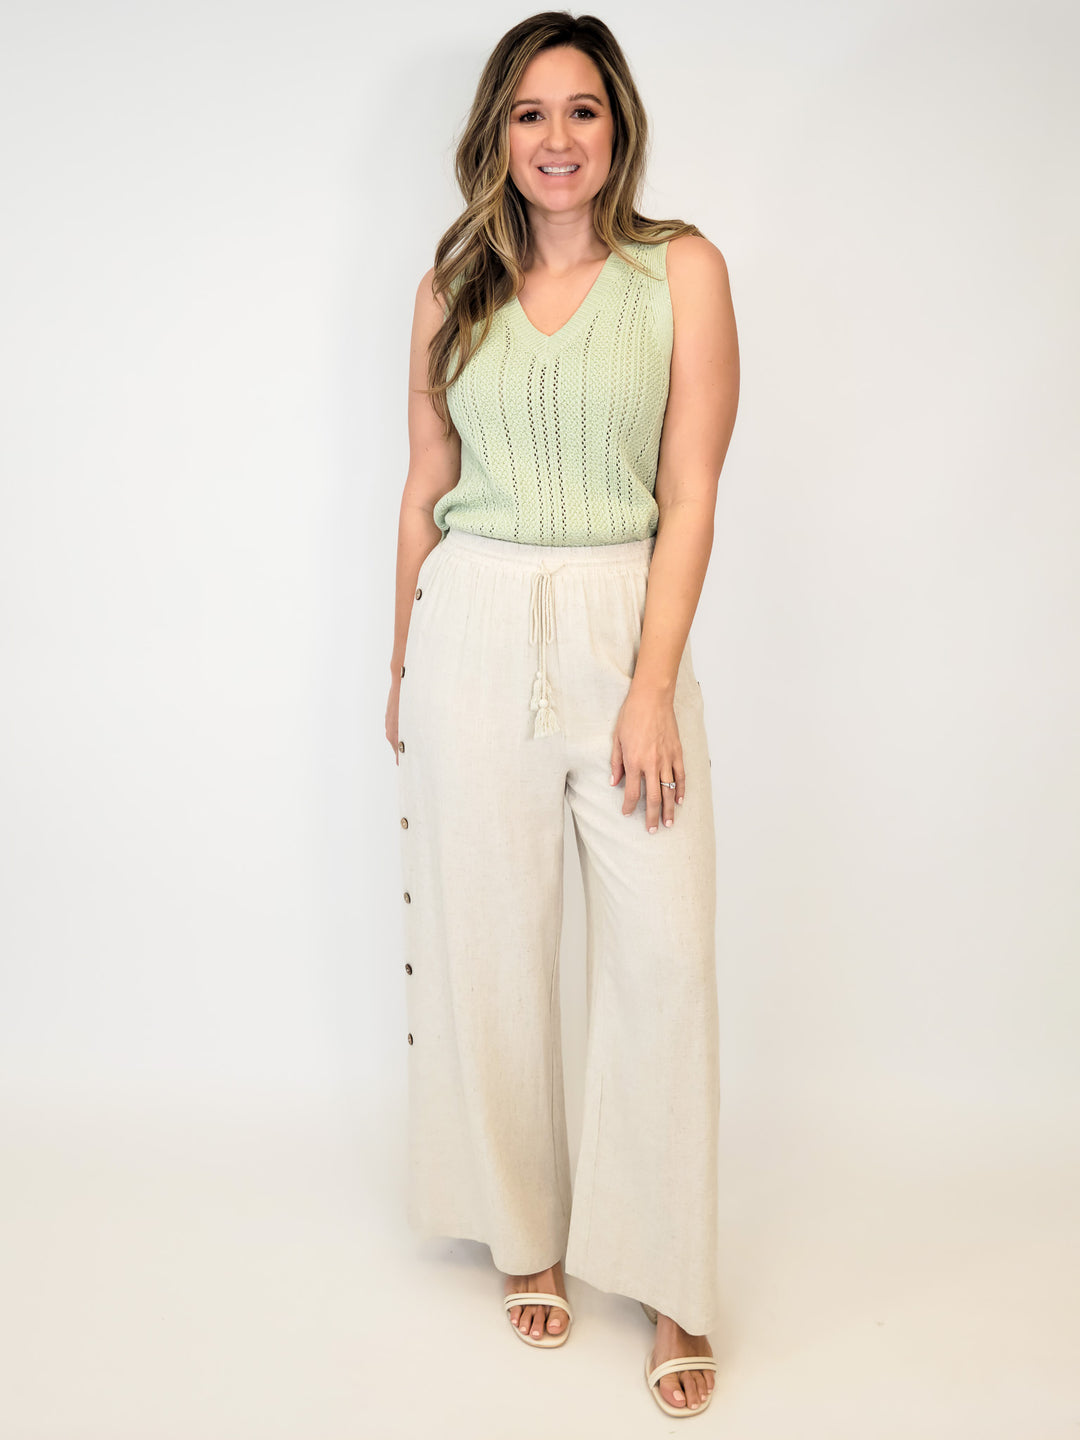 WIDE LEG PULL ON PANT W/SIDE BUTTONS - OATMEAL